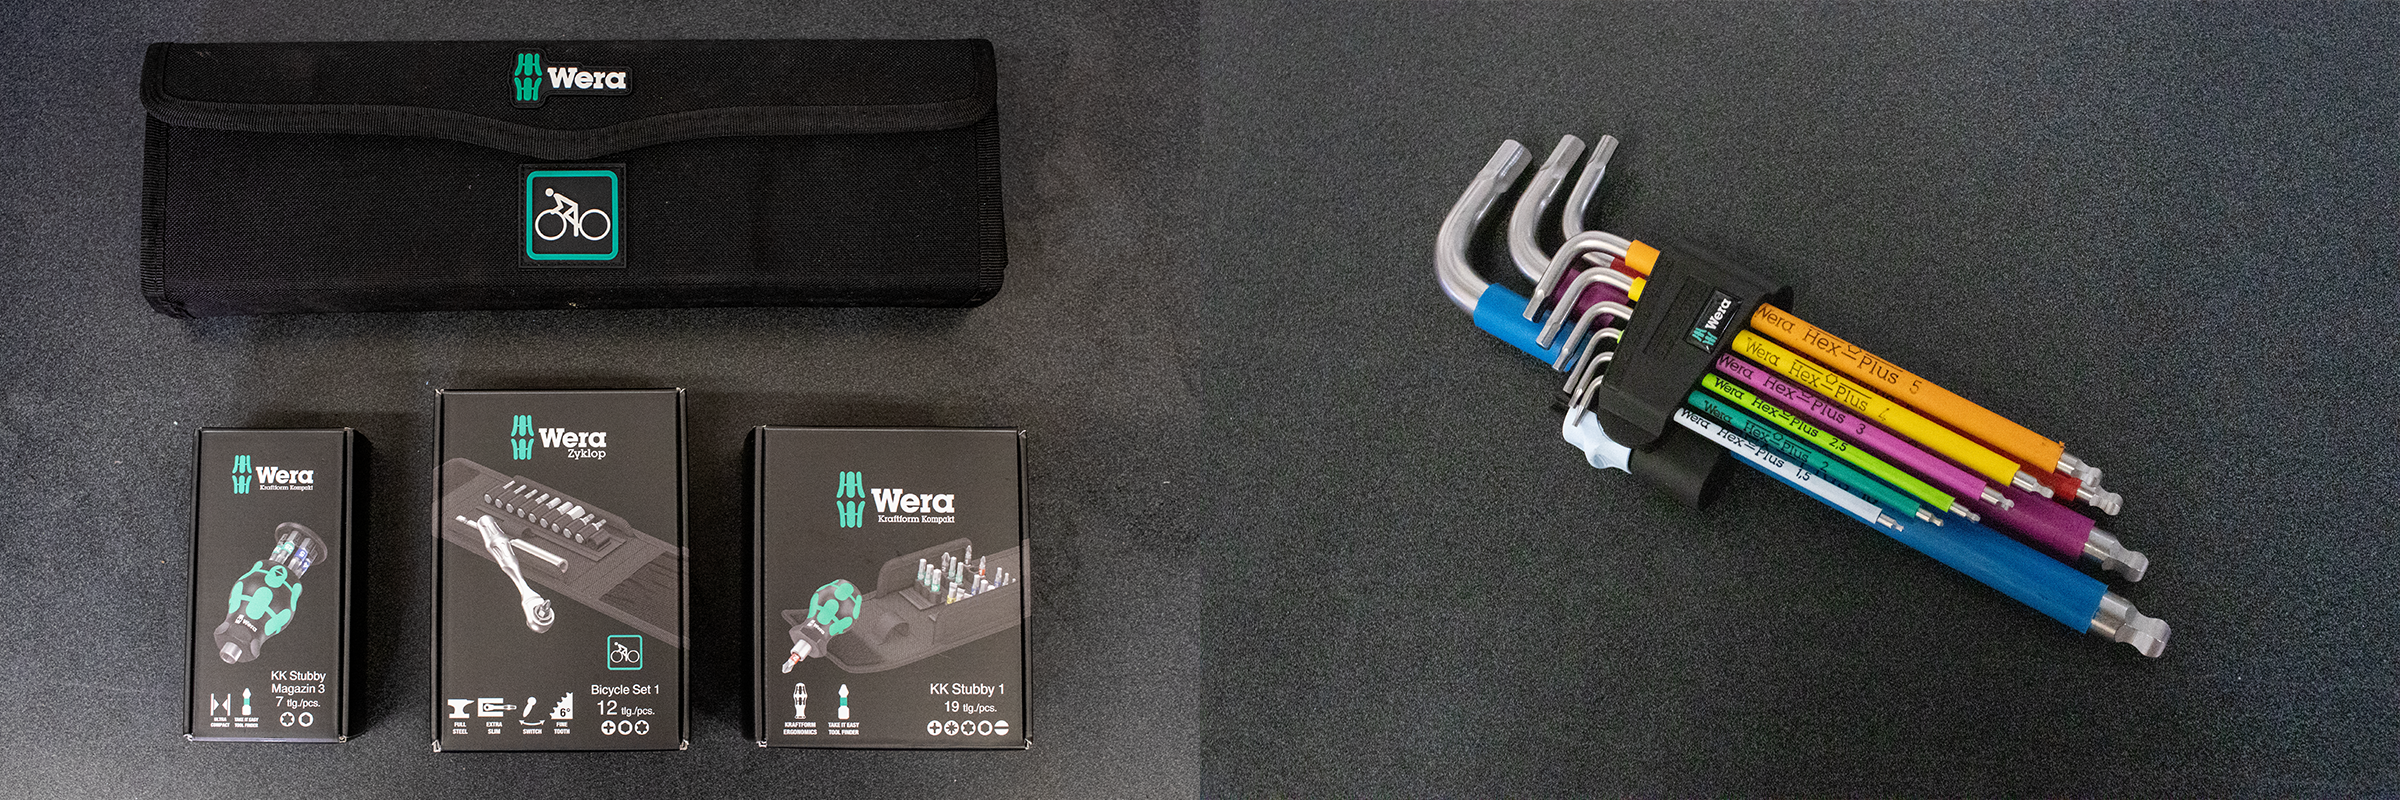 Wera Tools - Quality Torque Wrenches, Hex Keys, Ratchets & More